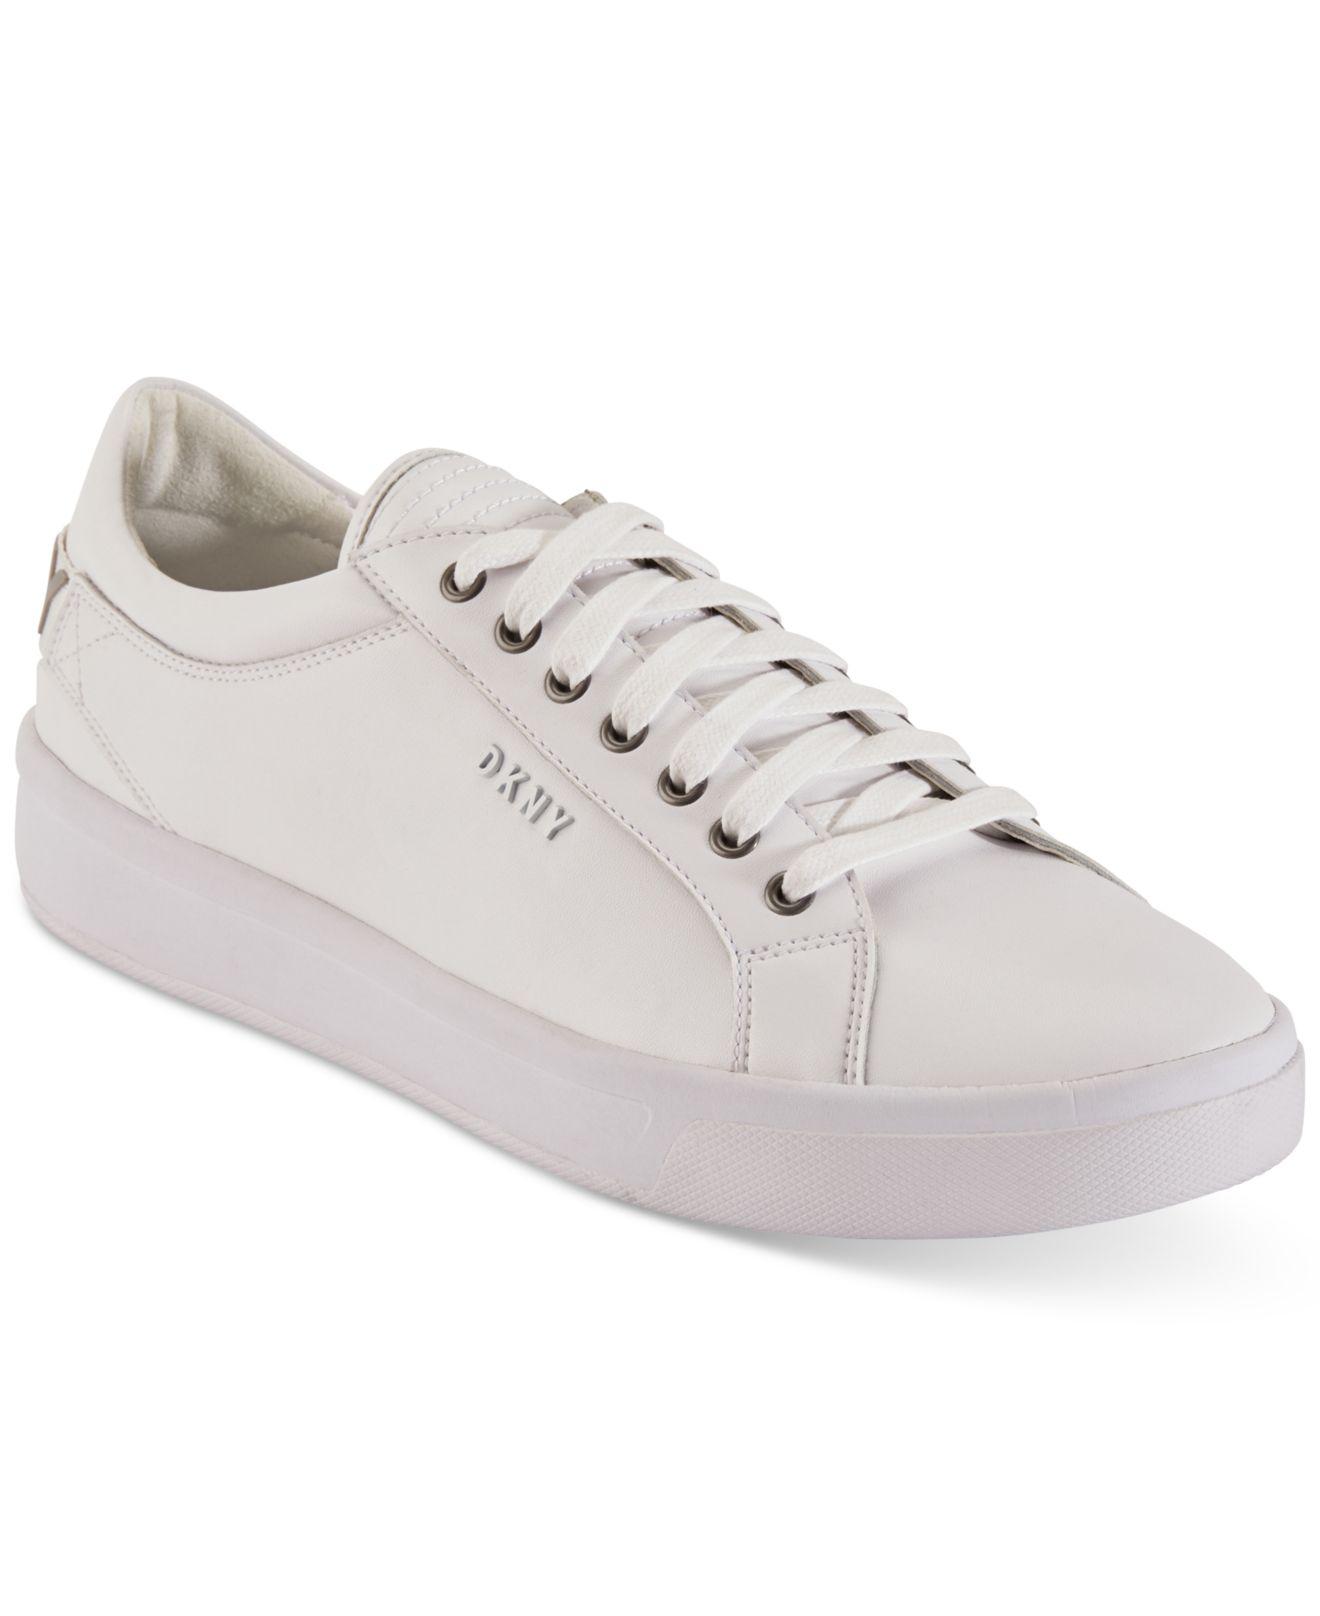 DKNY Leather Samson Lace-up Sneakers in 